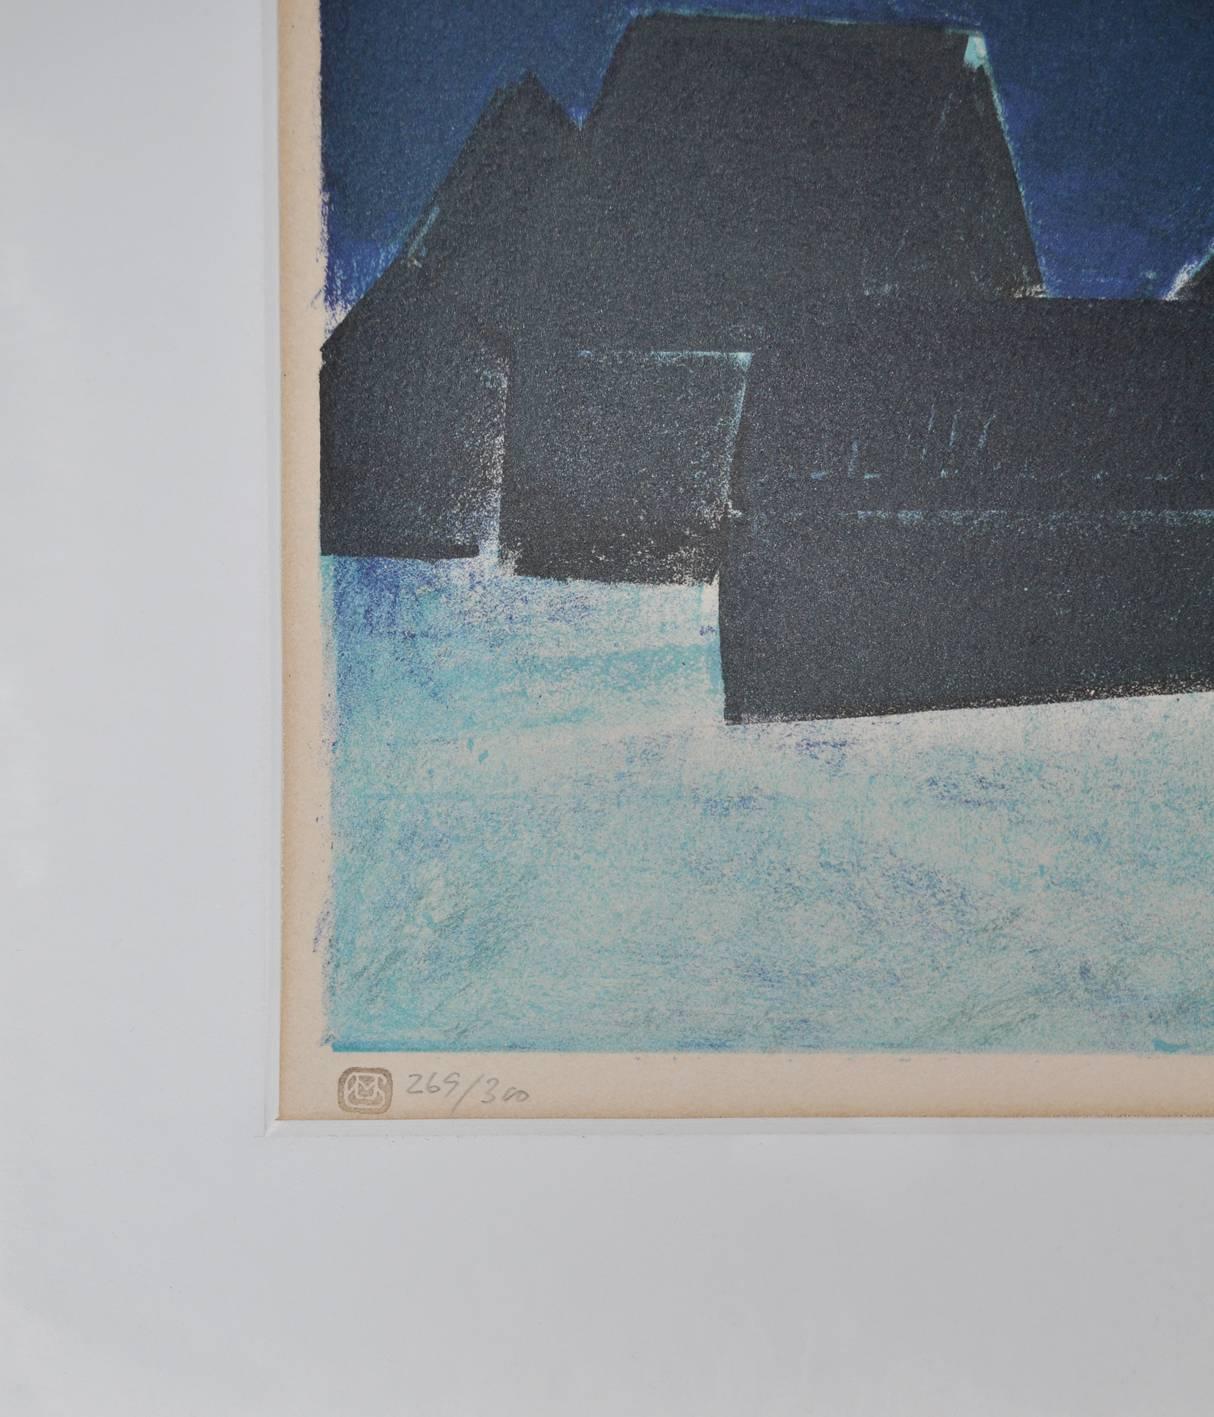 Jack Kampmann (1914-1989):
Color Lithographic printing on paper.
Sign .: Jack Kampmann 1977th
Number - 269/300.
Framed with glass
Measure: Width 71.5 cm, height 65.5 cm

Jack Kampmann was born in London of Danish parents. He grew up in the